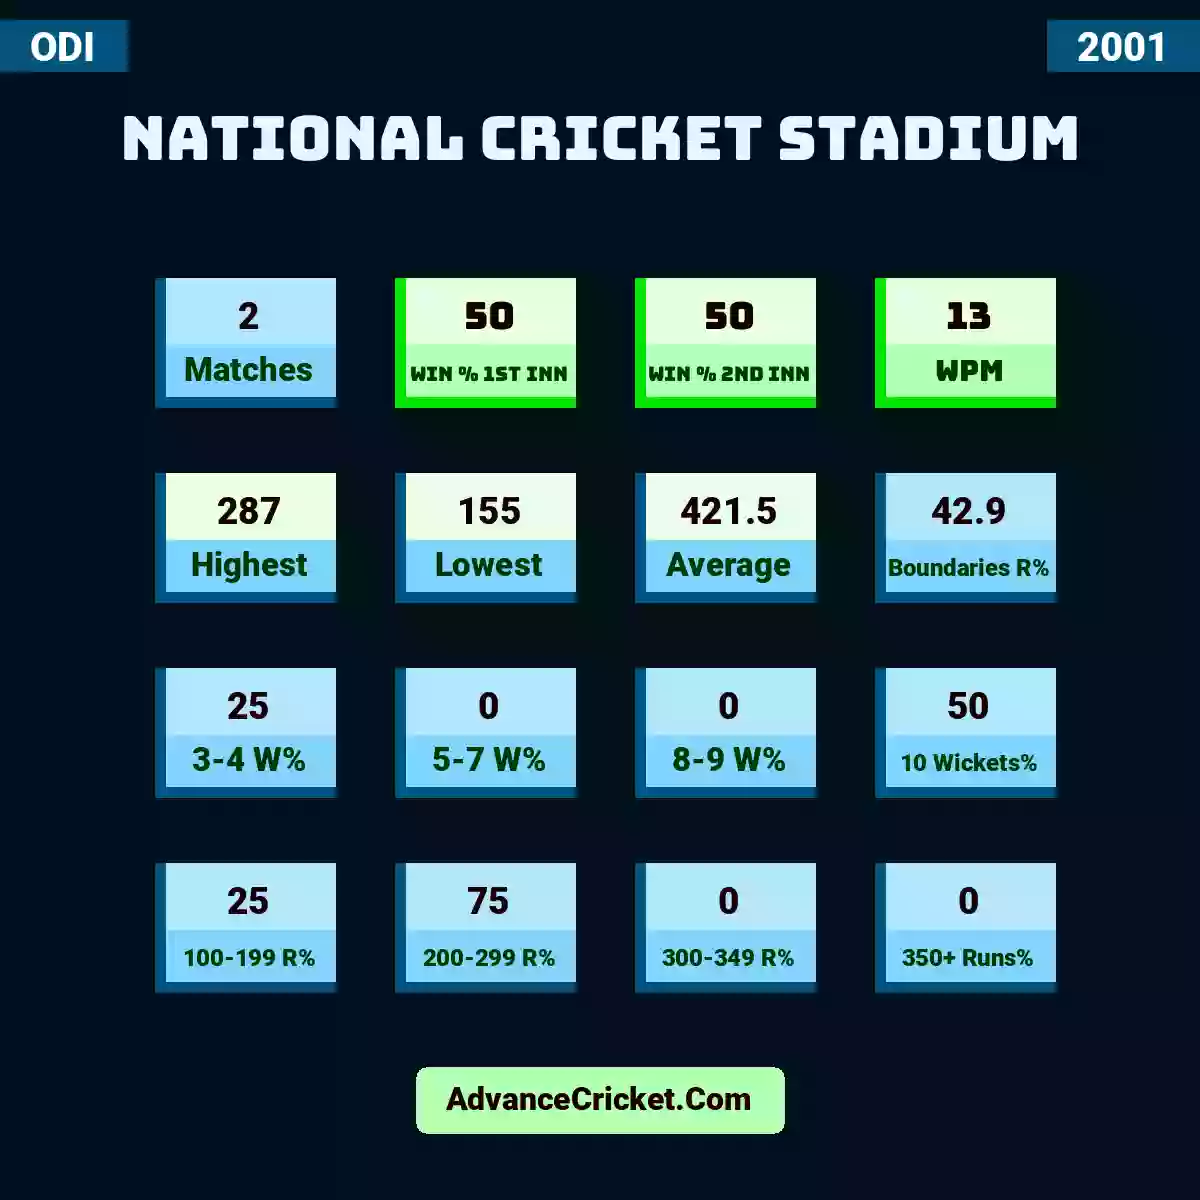 Image showing National Cricket Stadium with Matches: 2, Win % 1st Inn: 50, Win % 2nd Inn: 50, WPM: 13, Highest: 287, Lowest: 155, Average: 421.5, Boundaries R%: 42.9, 3-4 W%: 25, 5-7 W%: 0, 8-9 W%: 0, 10 Wickets%: 50, 100-199 R%: 25, 200-299 R%: 75, 300-349 R%: 0, 350+ Runs%: 0.